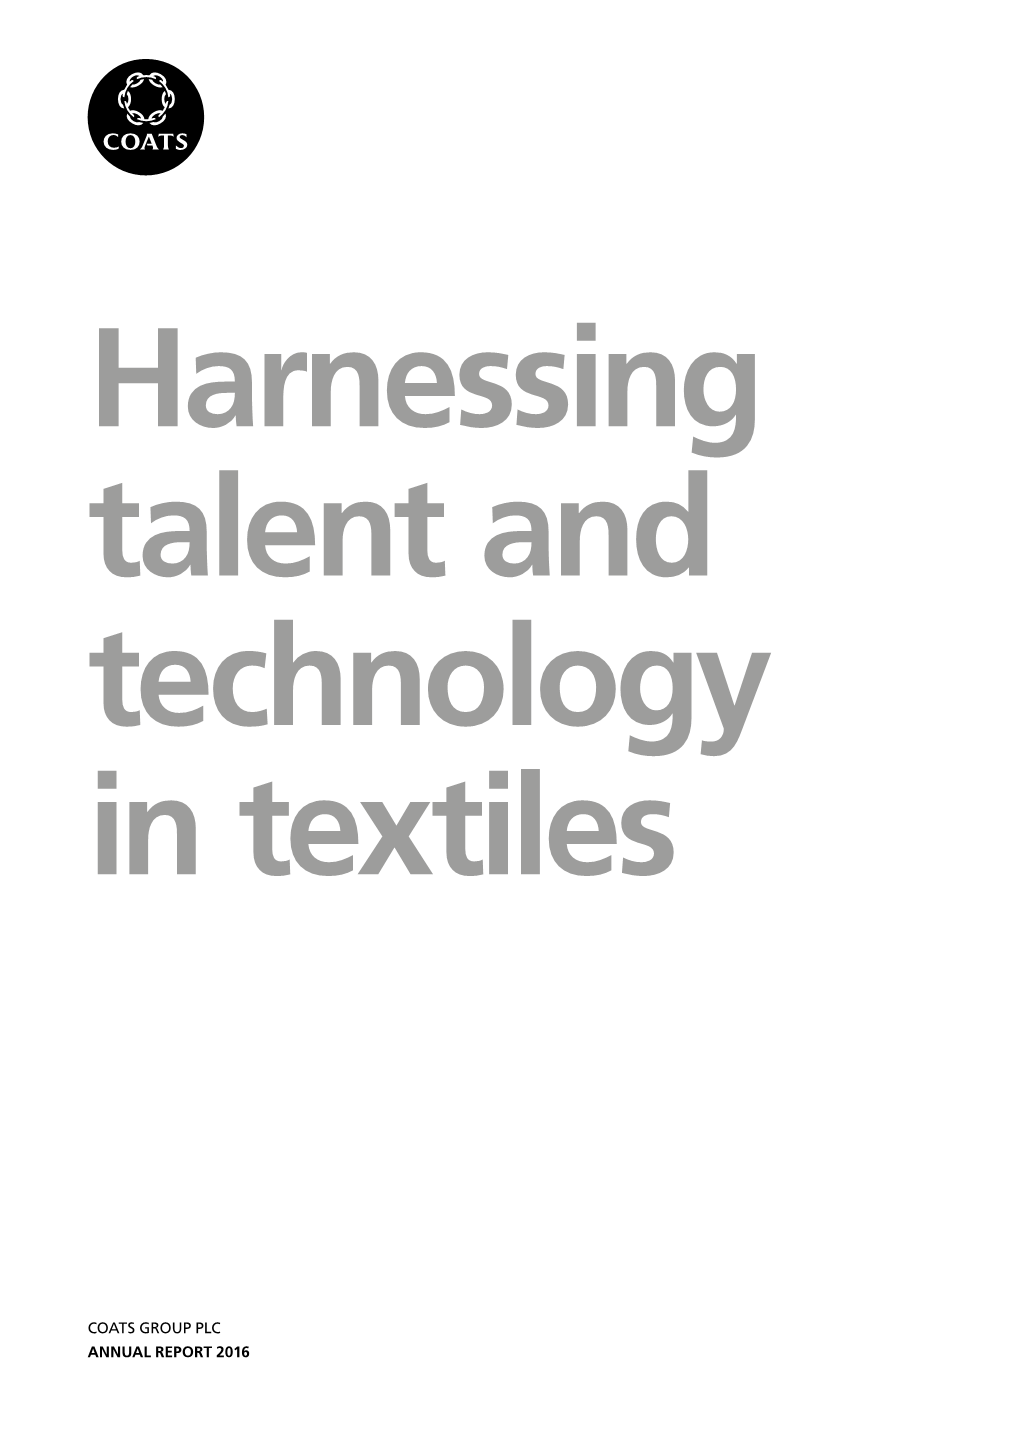 Annual Report 2016 Harnessing Talent and Technology in Textiles